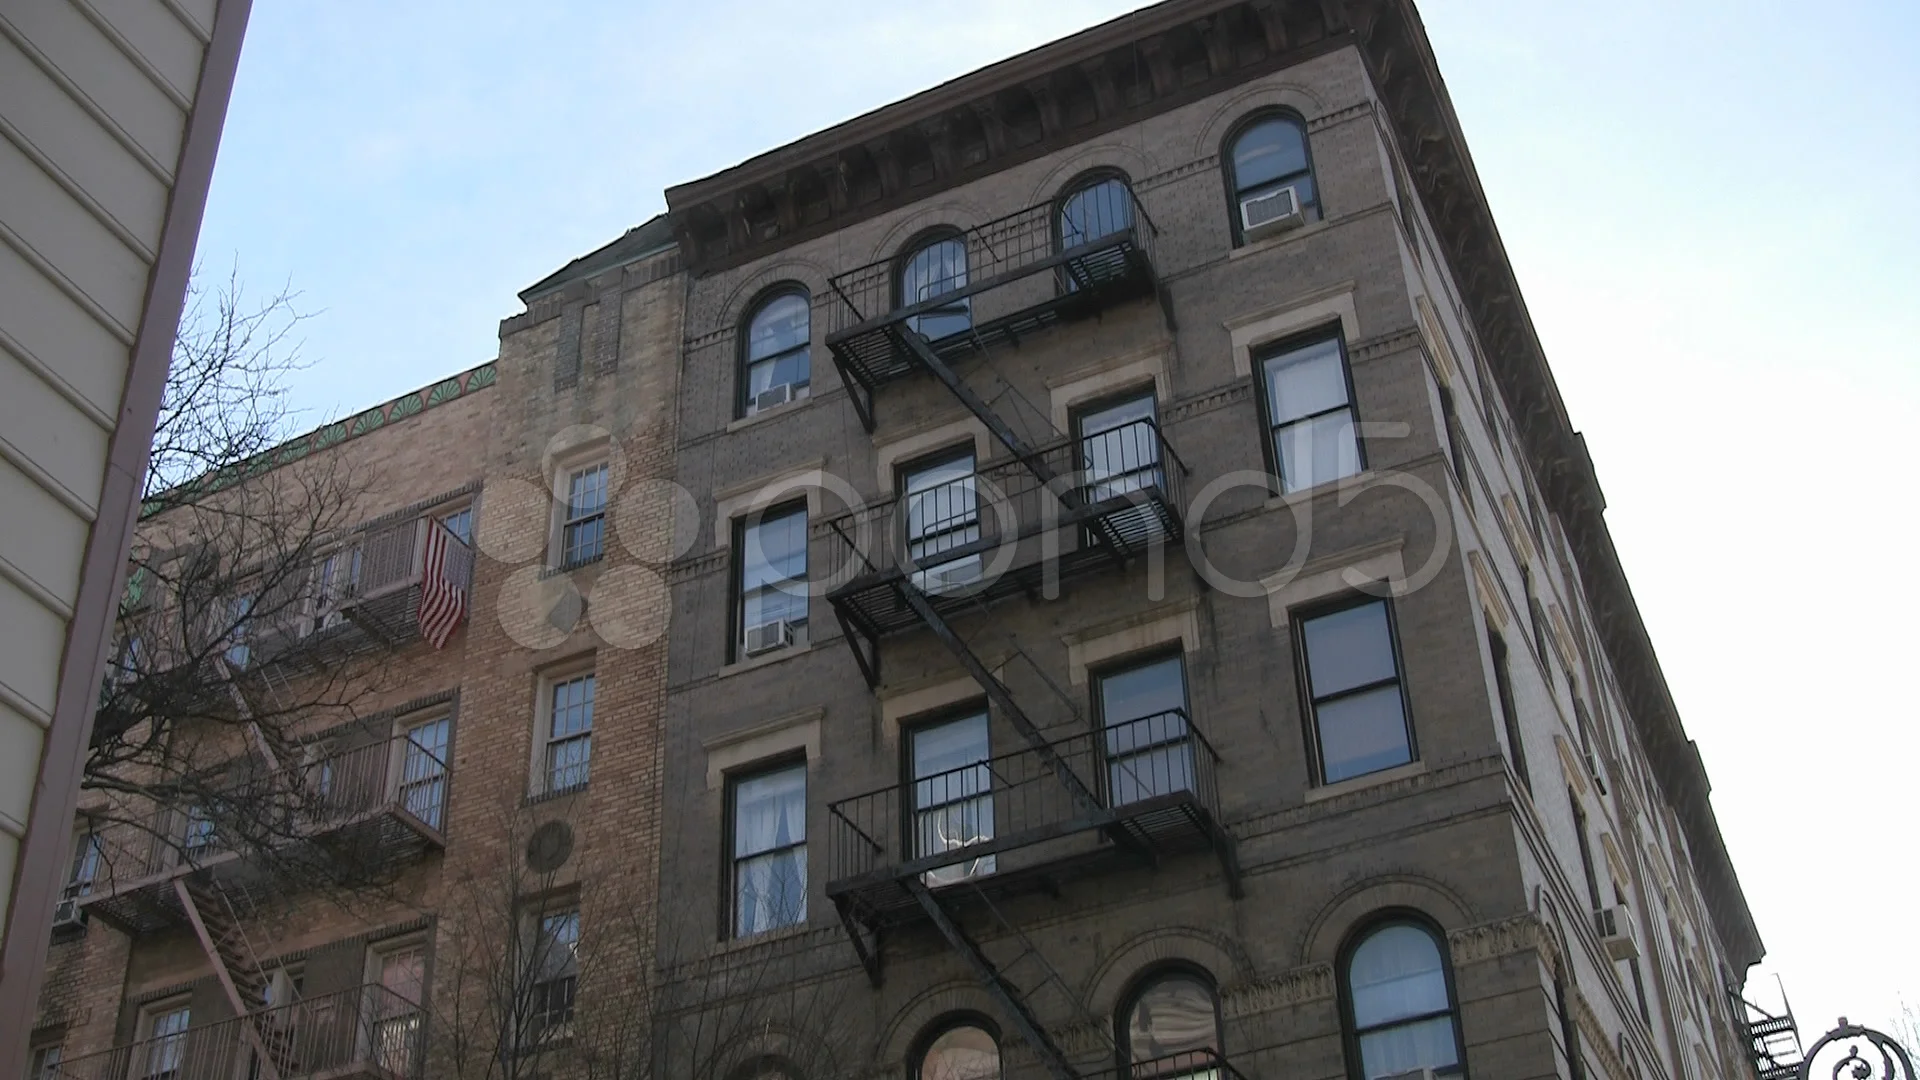 How to Find the Friends Apartment Building in NYC 